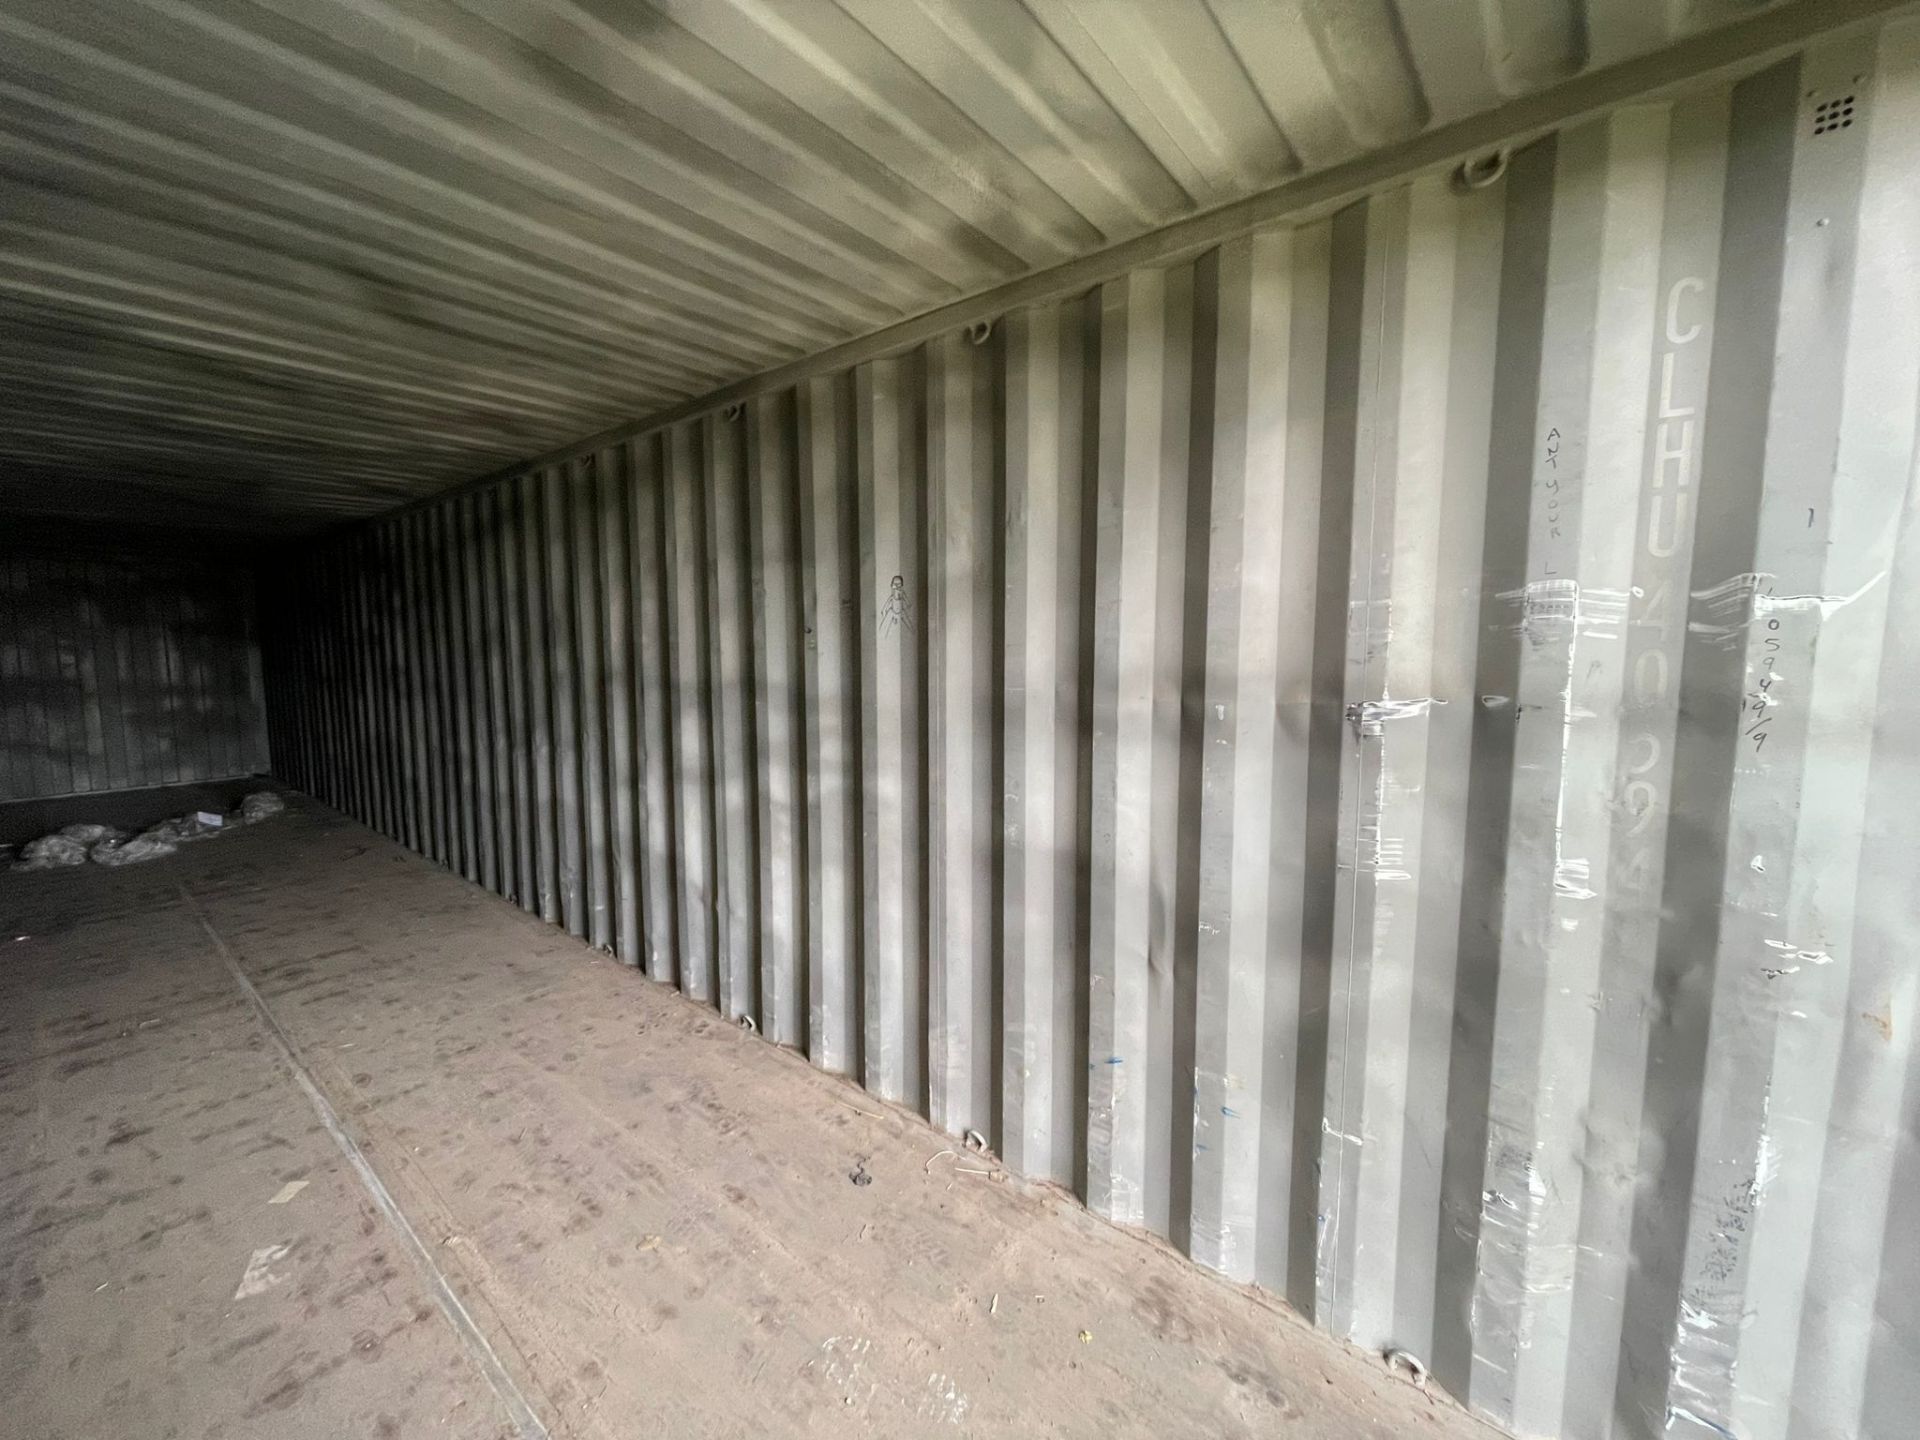 Shipping Container - ref CLHU4059499 - NO RESERVE (40’ GP - Standard) - Image 2 of 4